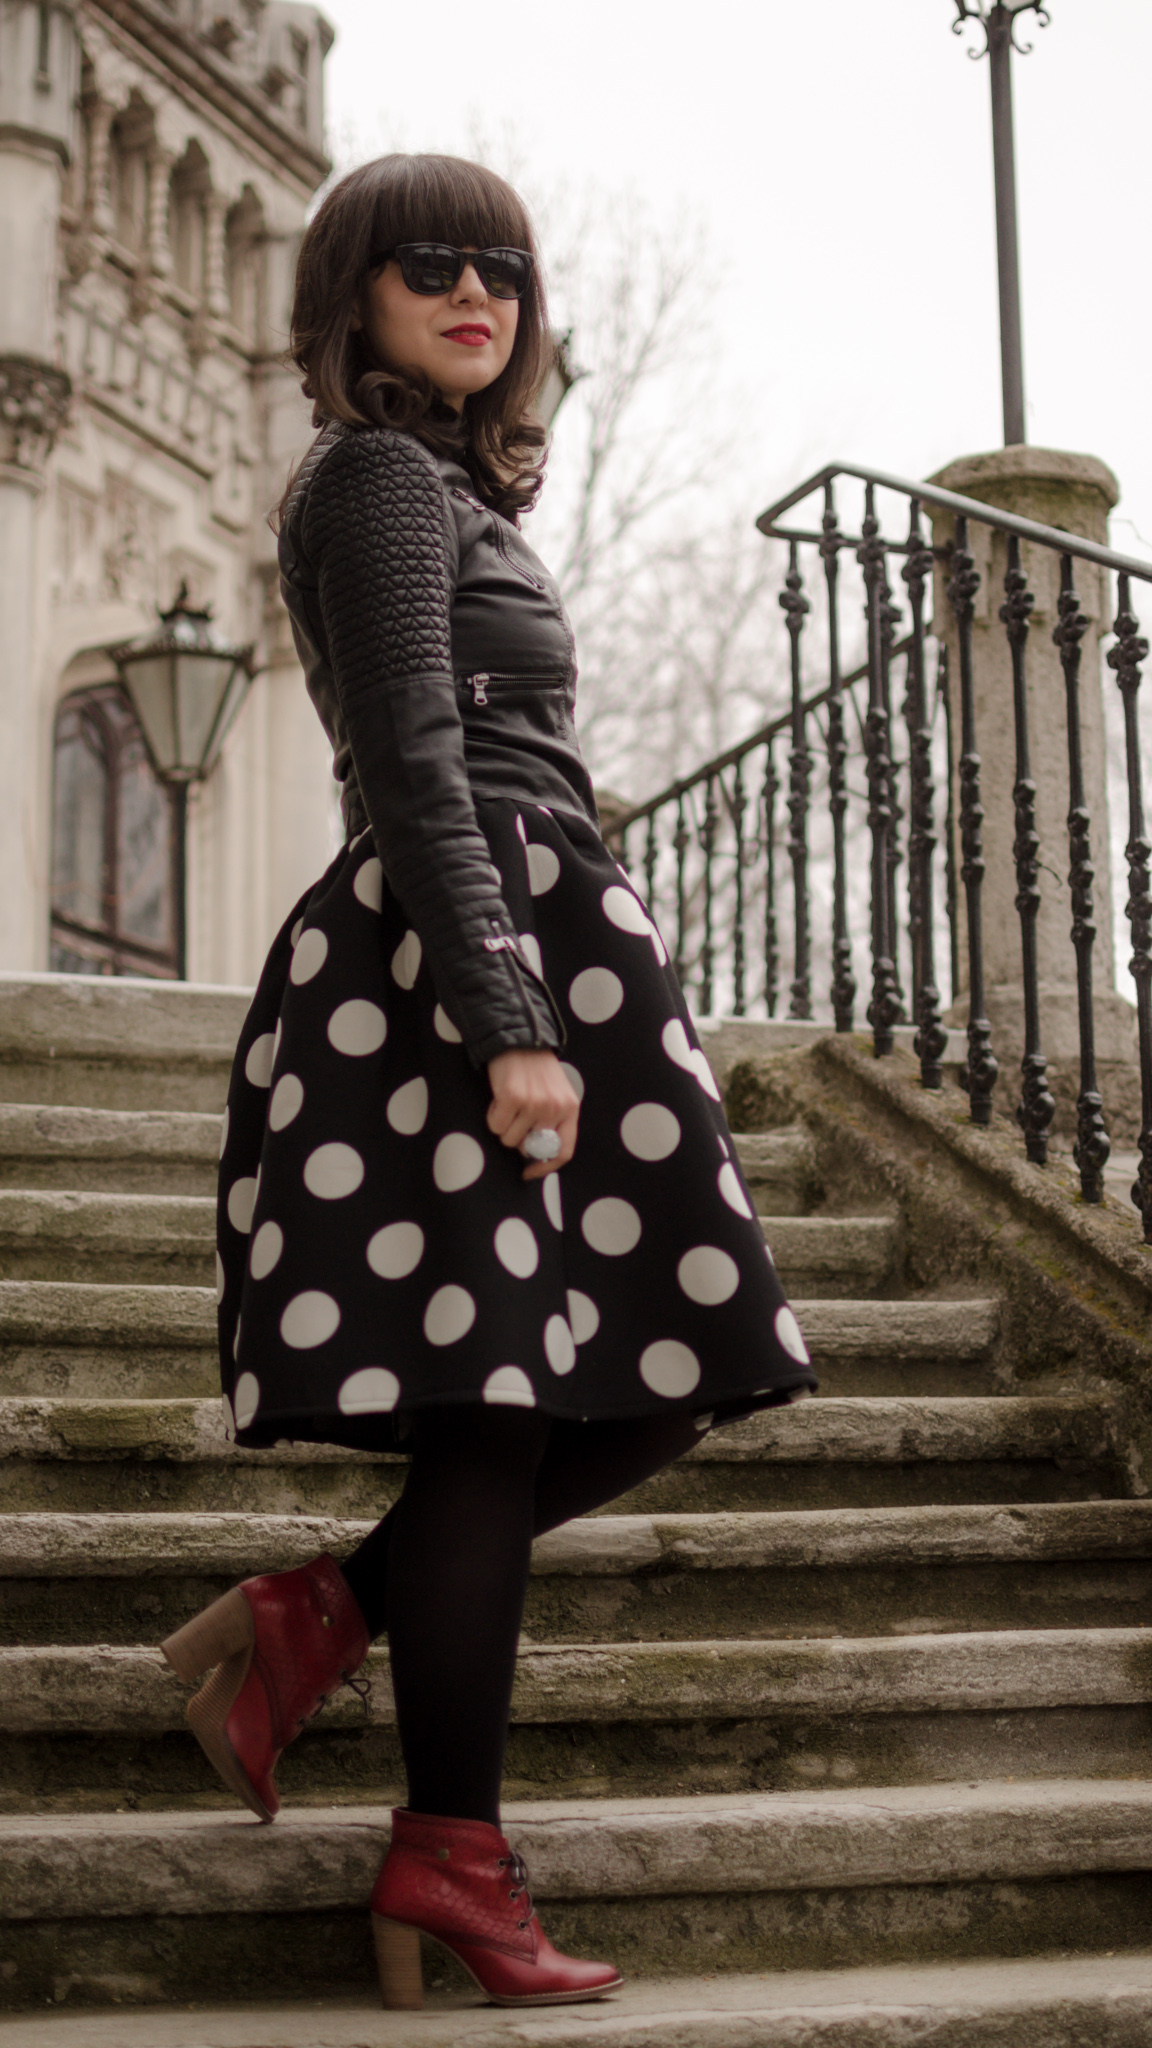 big polka dots puffed up skirt sheinside rock leather jacket burgundy boots black & white cats t-shirt spring new yorker